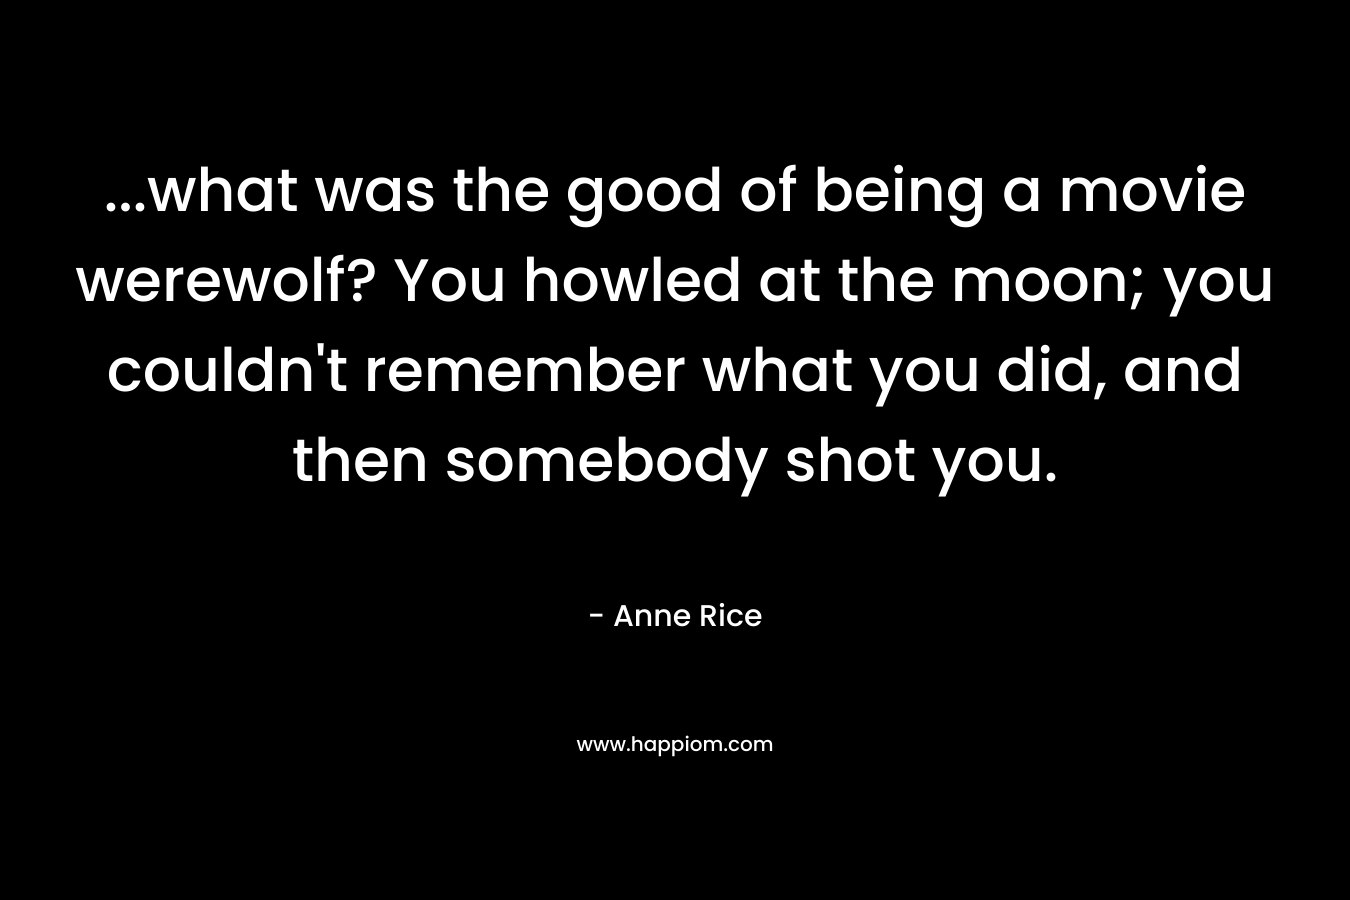 ...what was the good of being a movie werewolf? You howled at the moon; you couldn't remember what you did, and then somebody shot you.